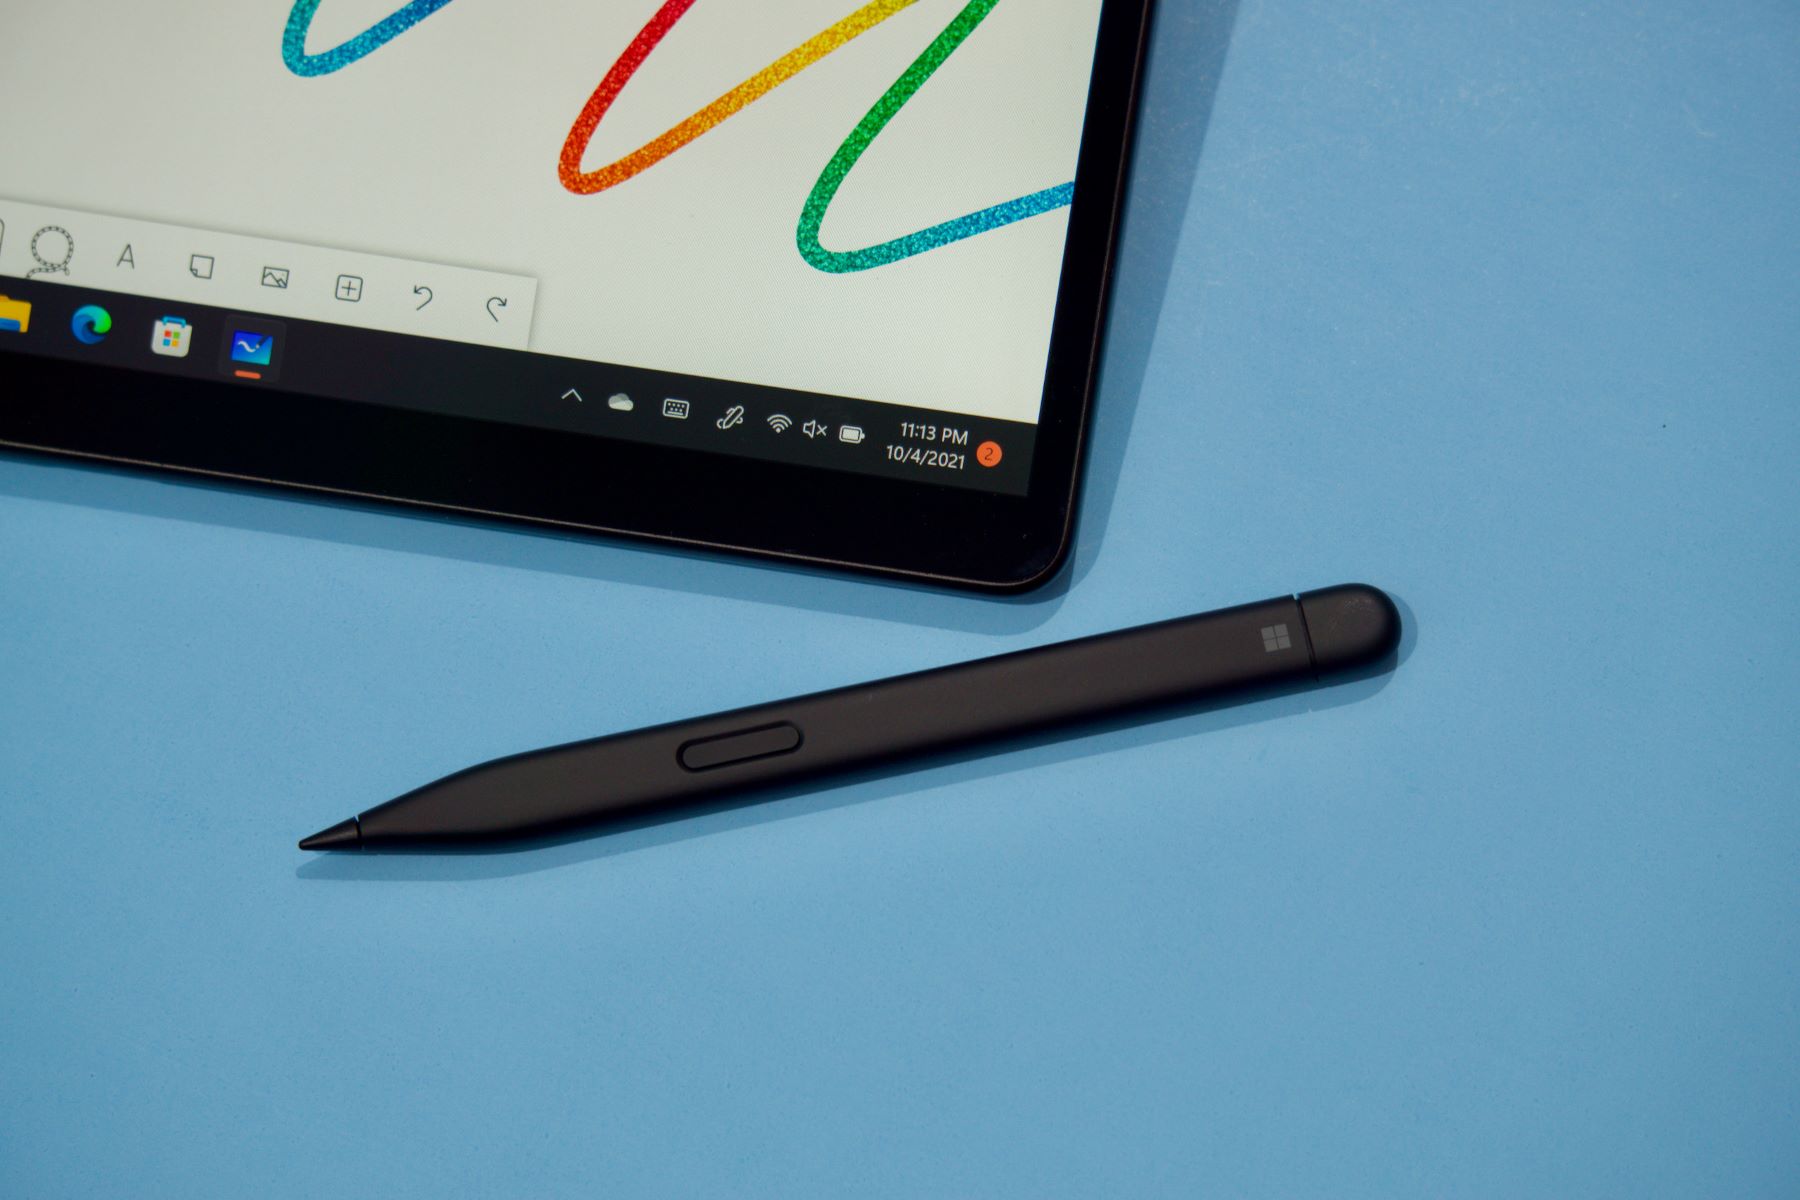 Connecting A Stylus Pen To Your Surface Pro: Step-by-Step Guide